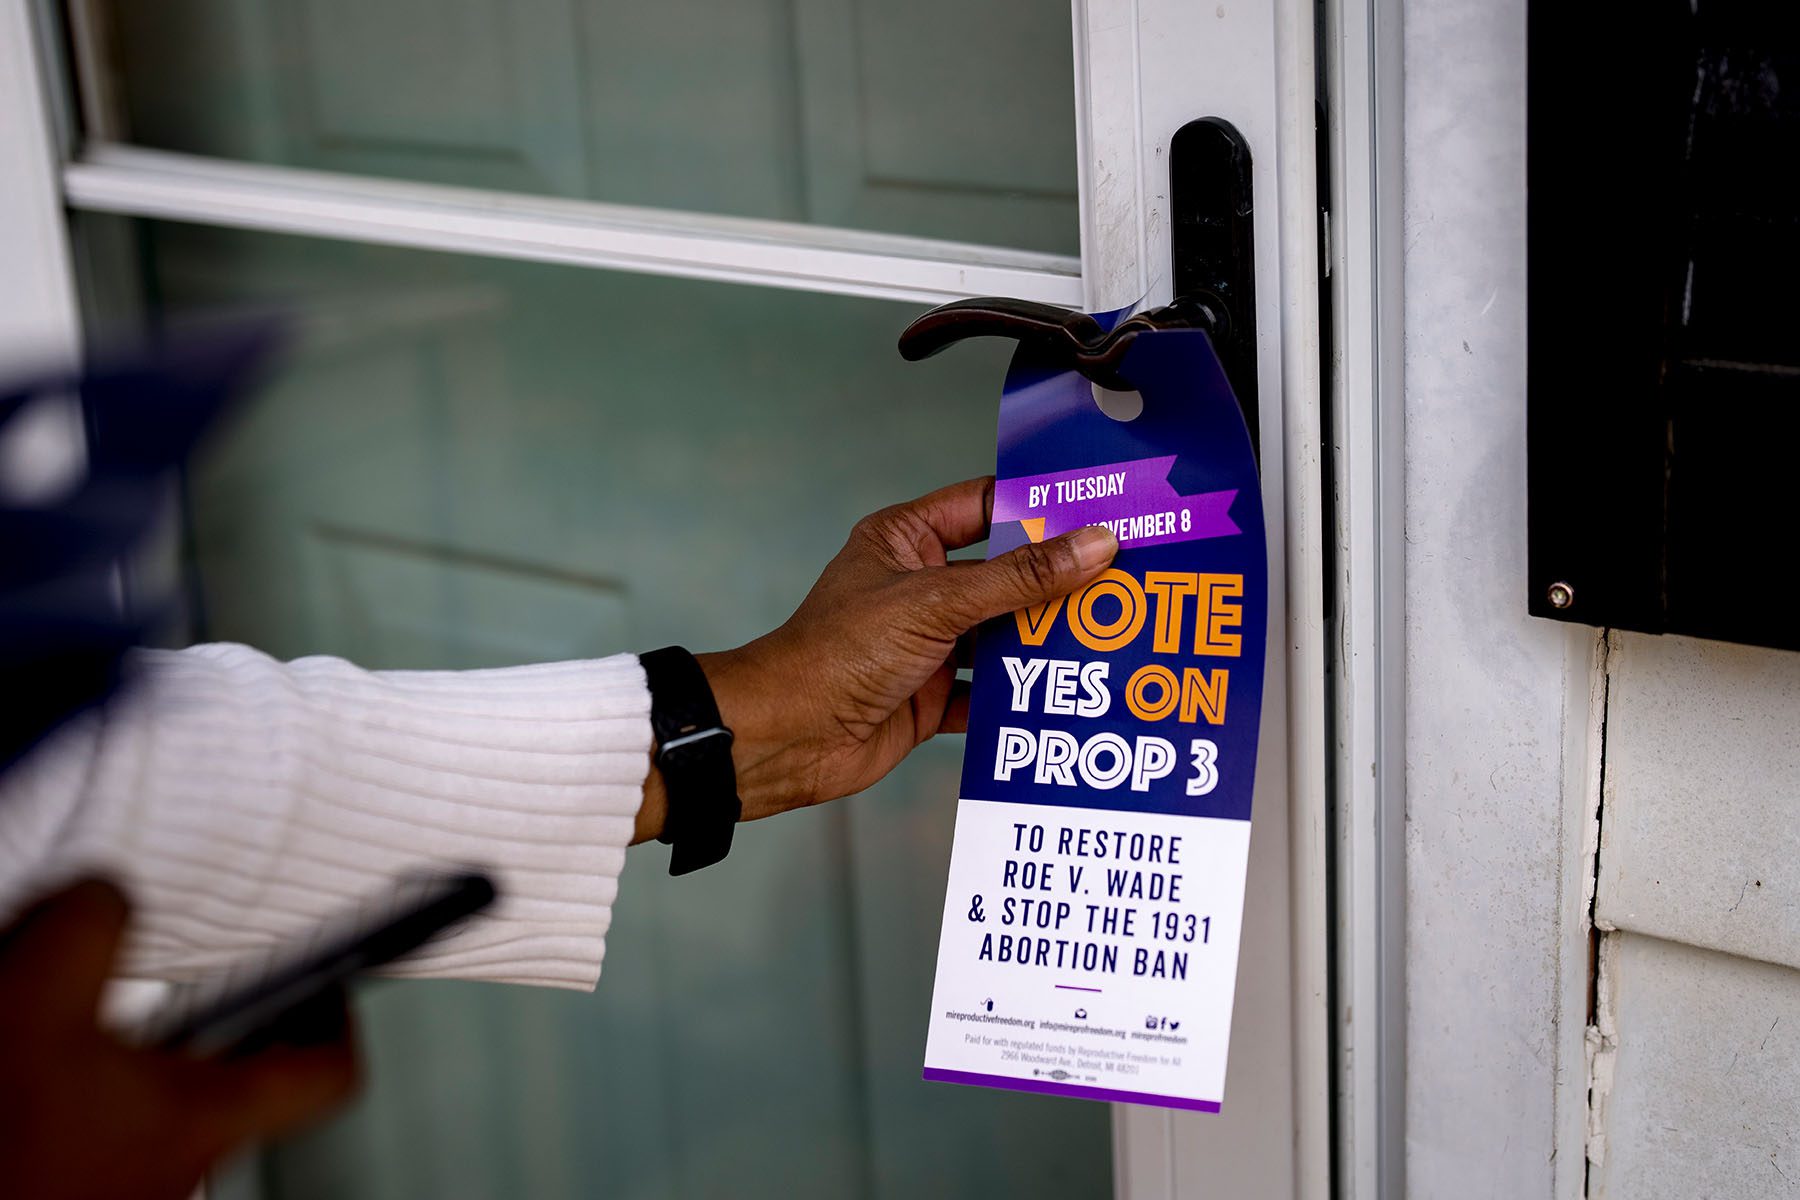 A volunteer places a door tag in support of Proposal 3 on a door. The tag read "vote yes on prop 3 to restore roe v. wade and stop the 1931 abortion ban."